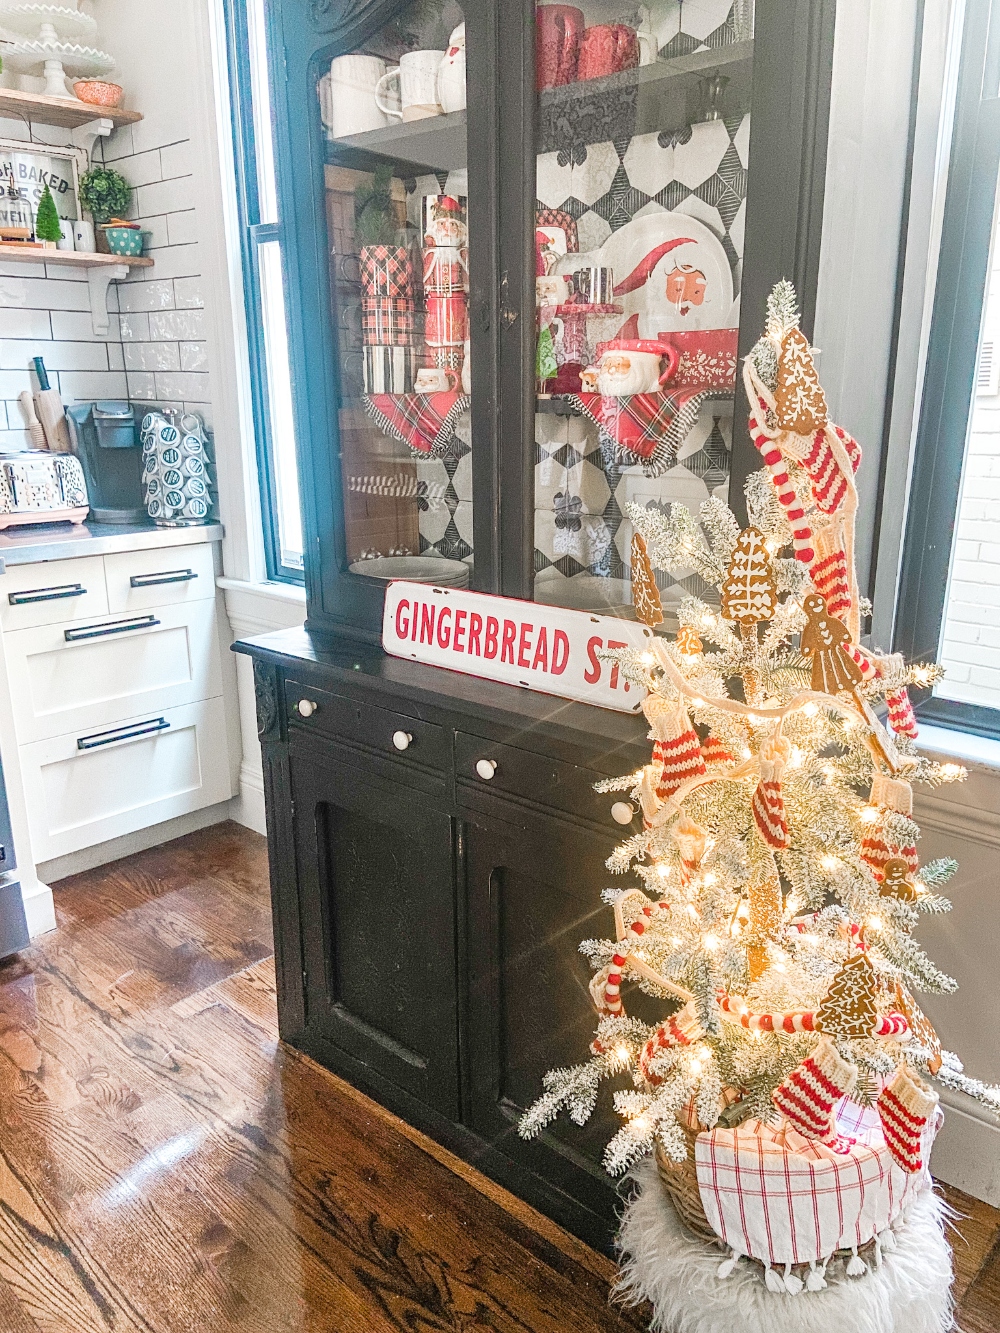 Gingerbread Men Tabletop Holiday Tree! Create a sweet kitchen gingerbread tree with homemade ornaments! 